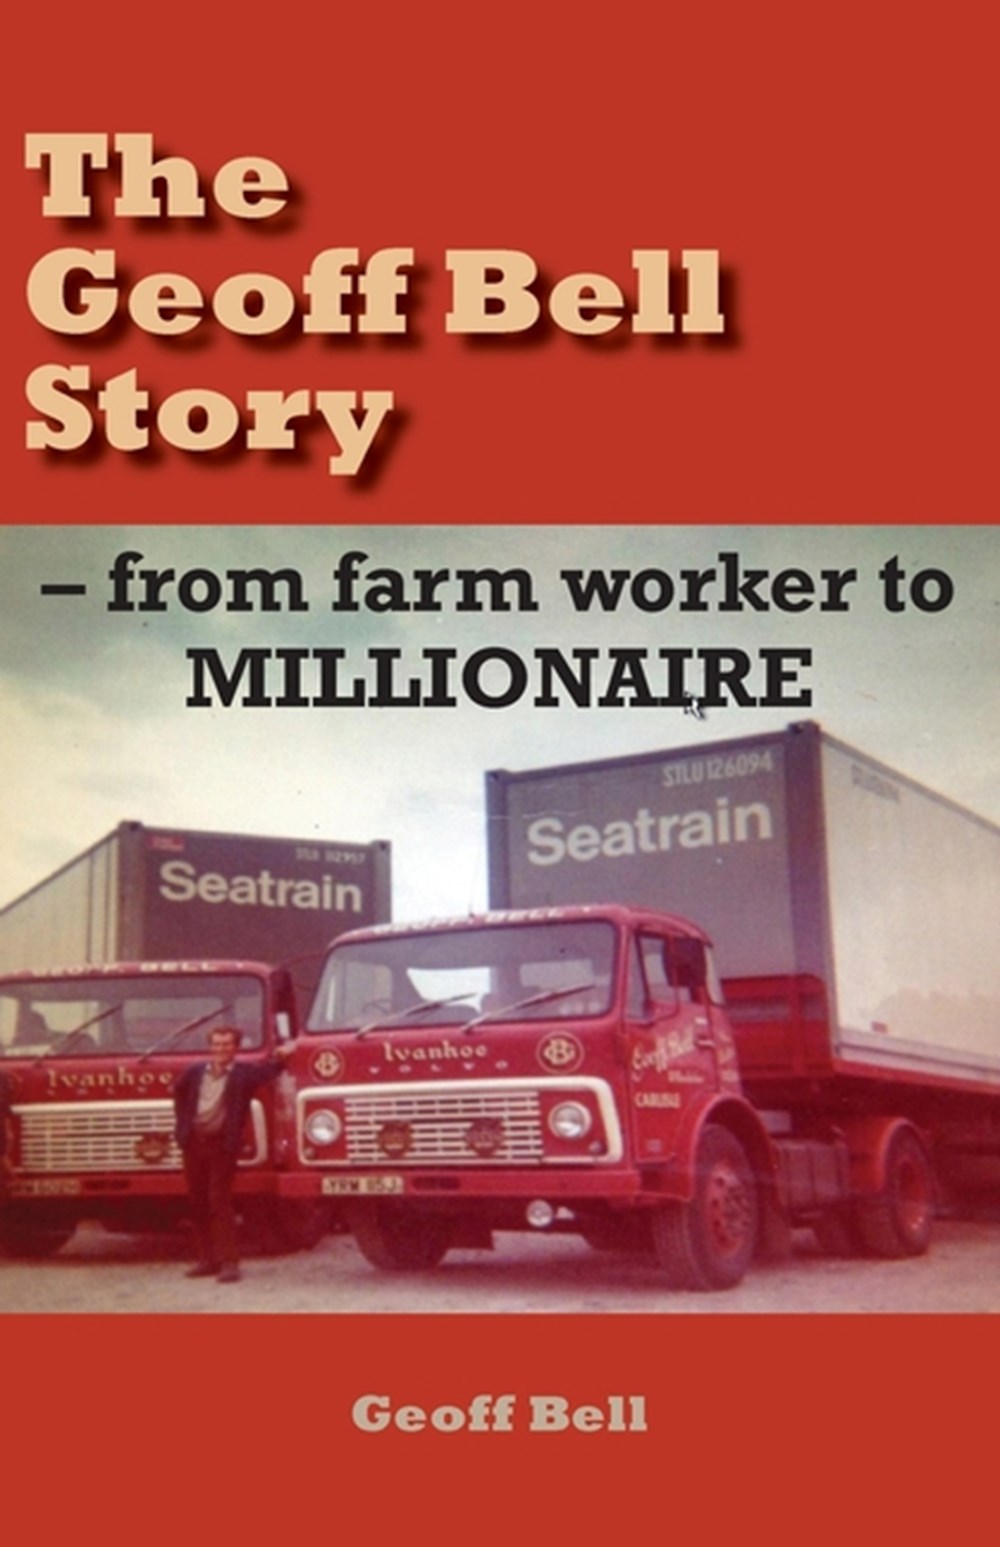 Geoff Bell Story from farm worker to MILLIONAIRE